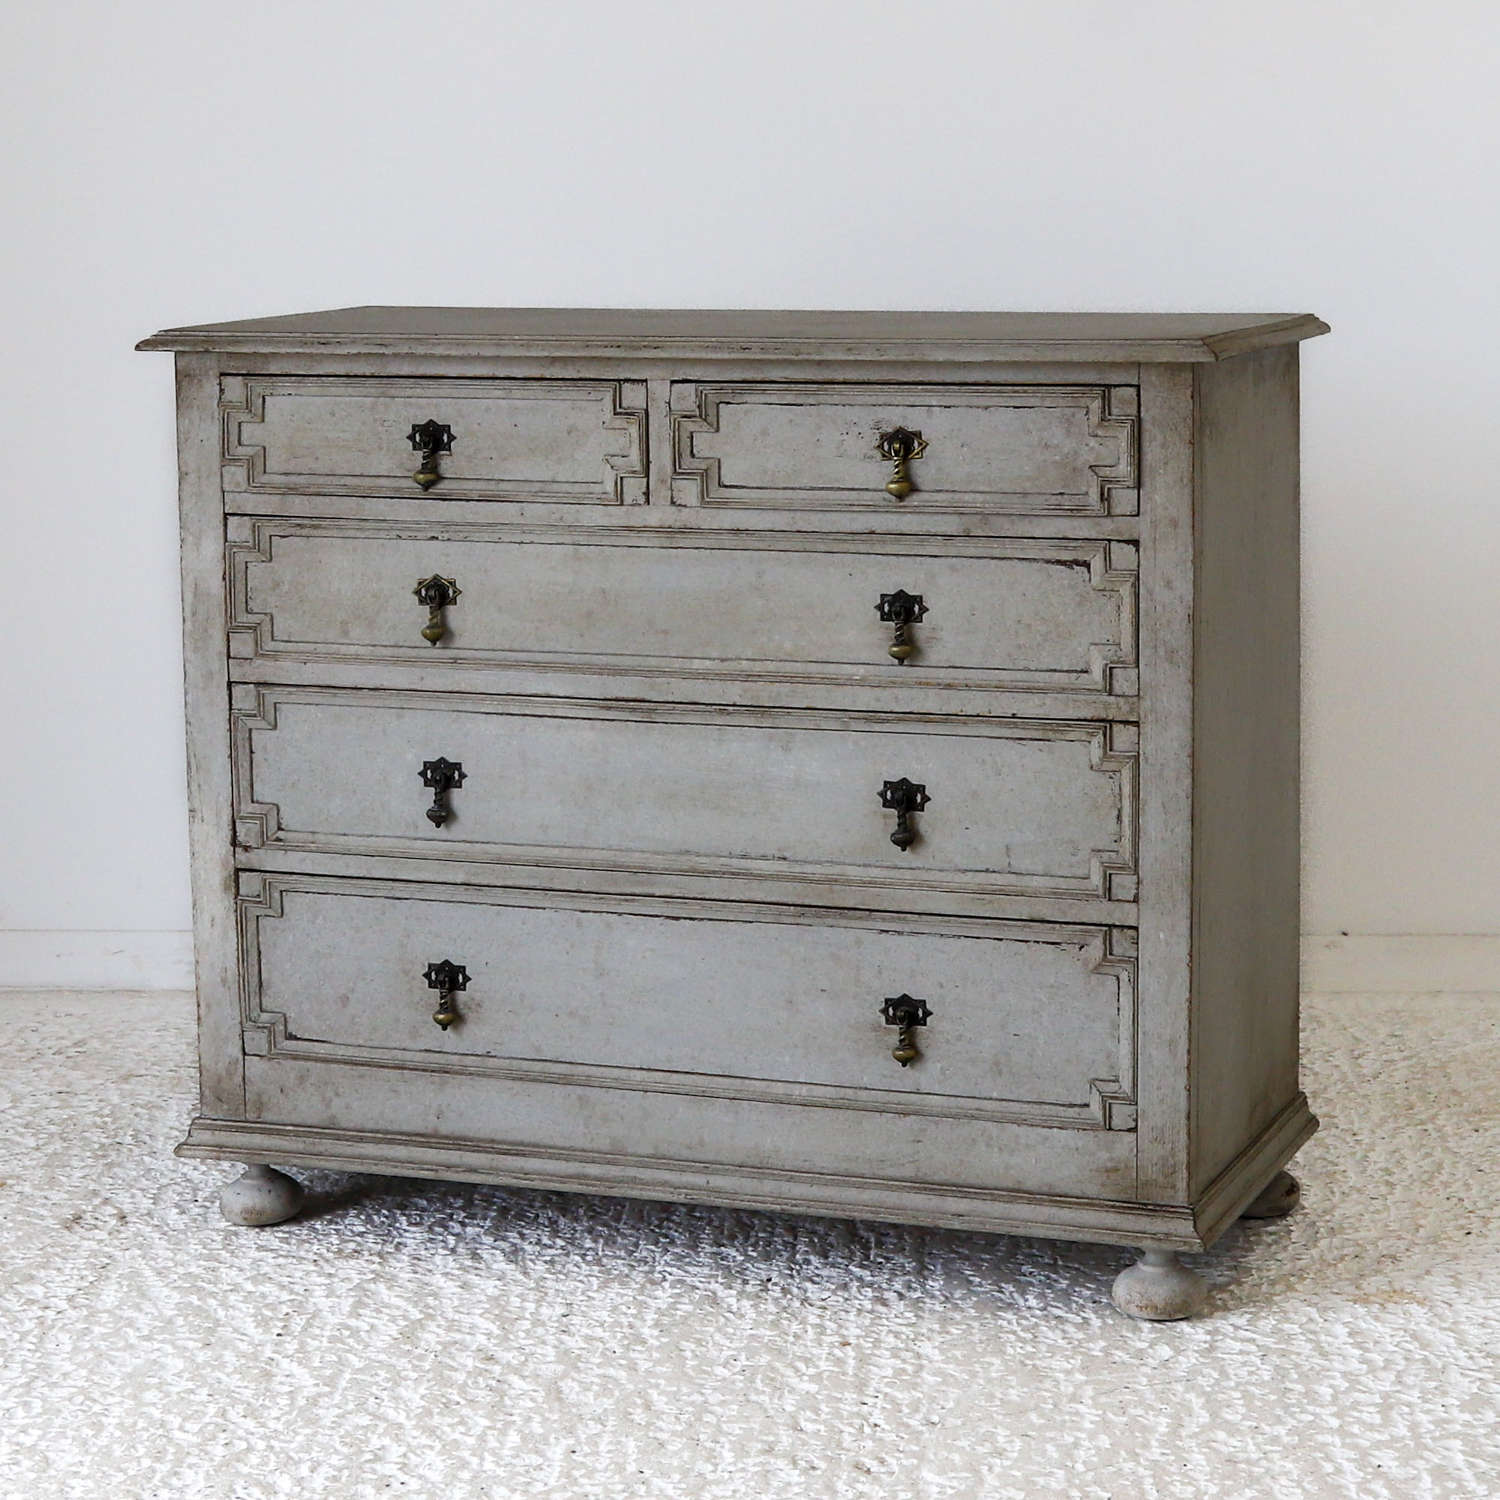 Oak Chest of Drawers with Geometric Moulding Mottled Grey Paint Finish